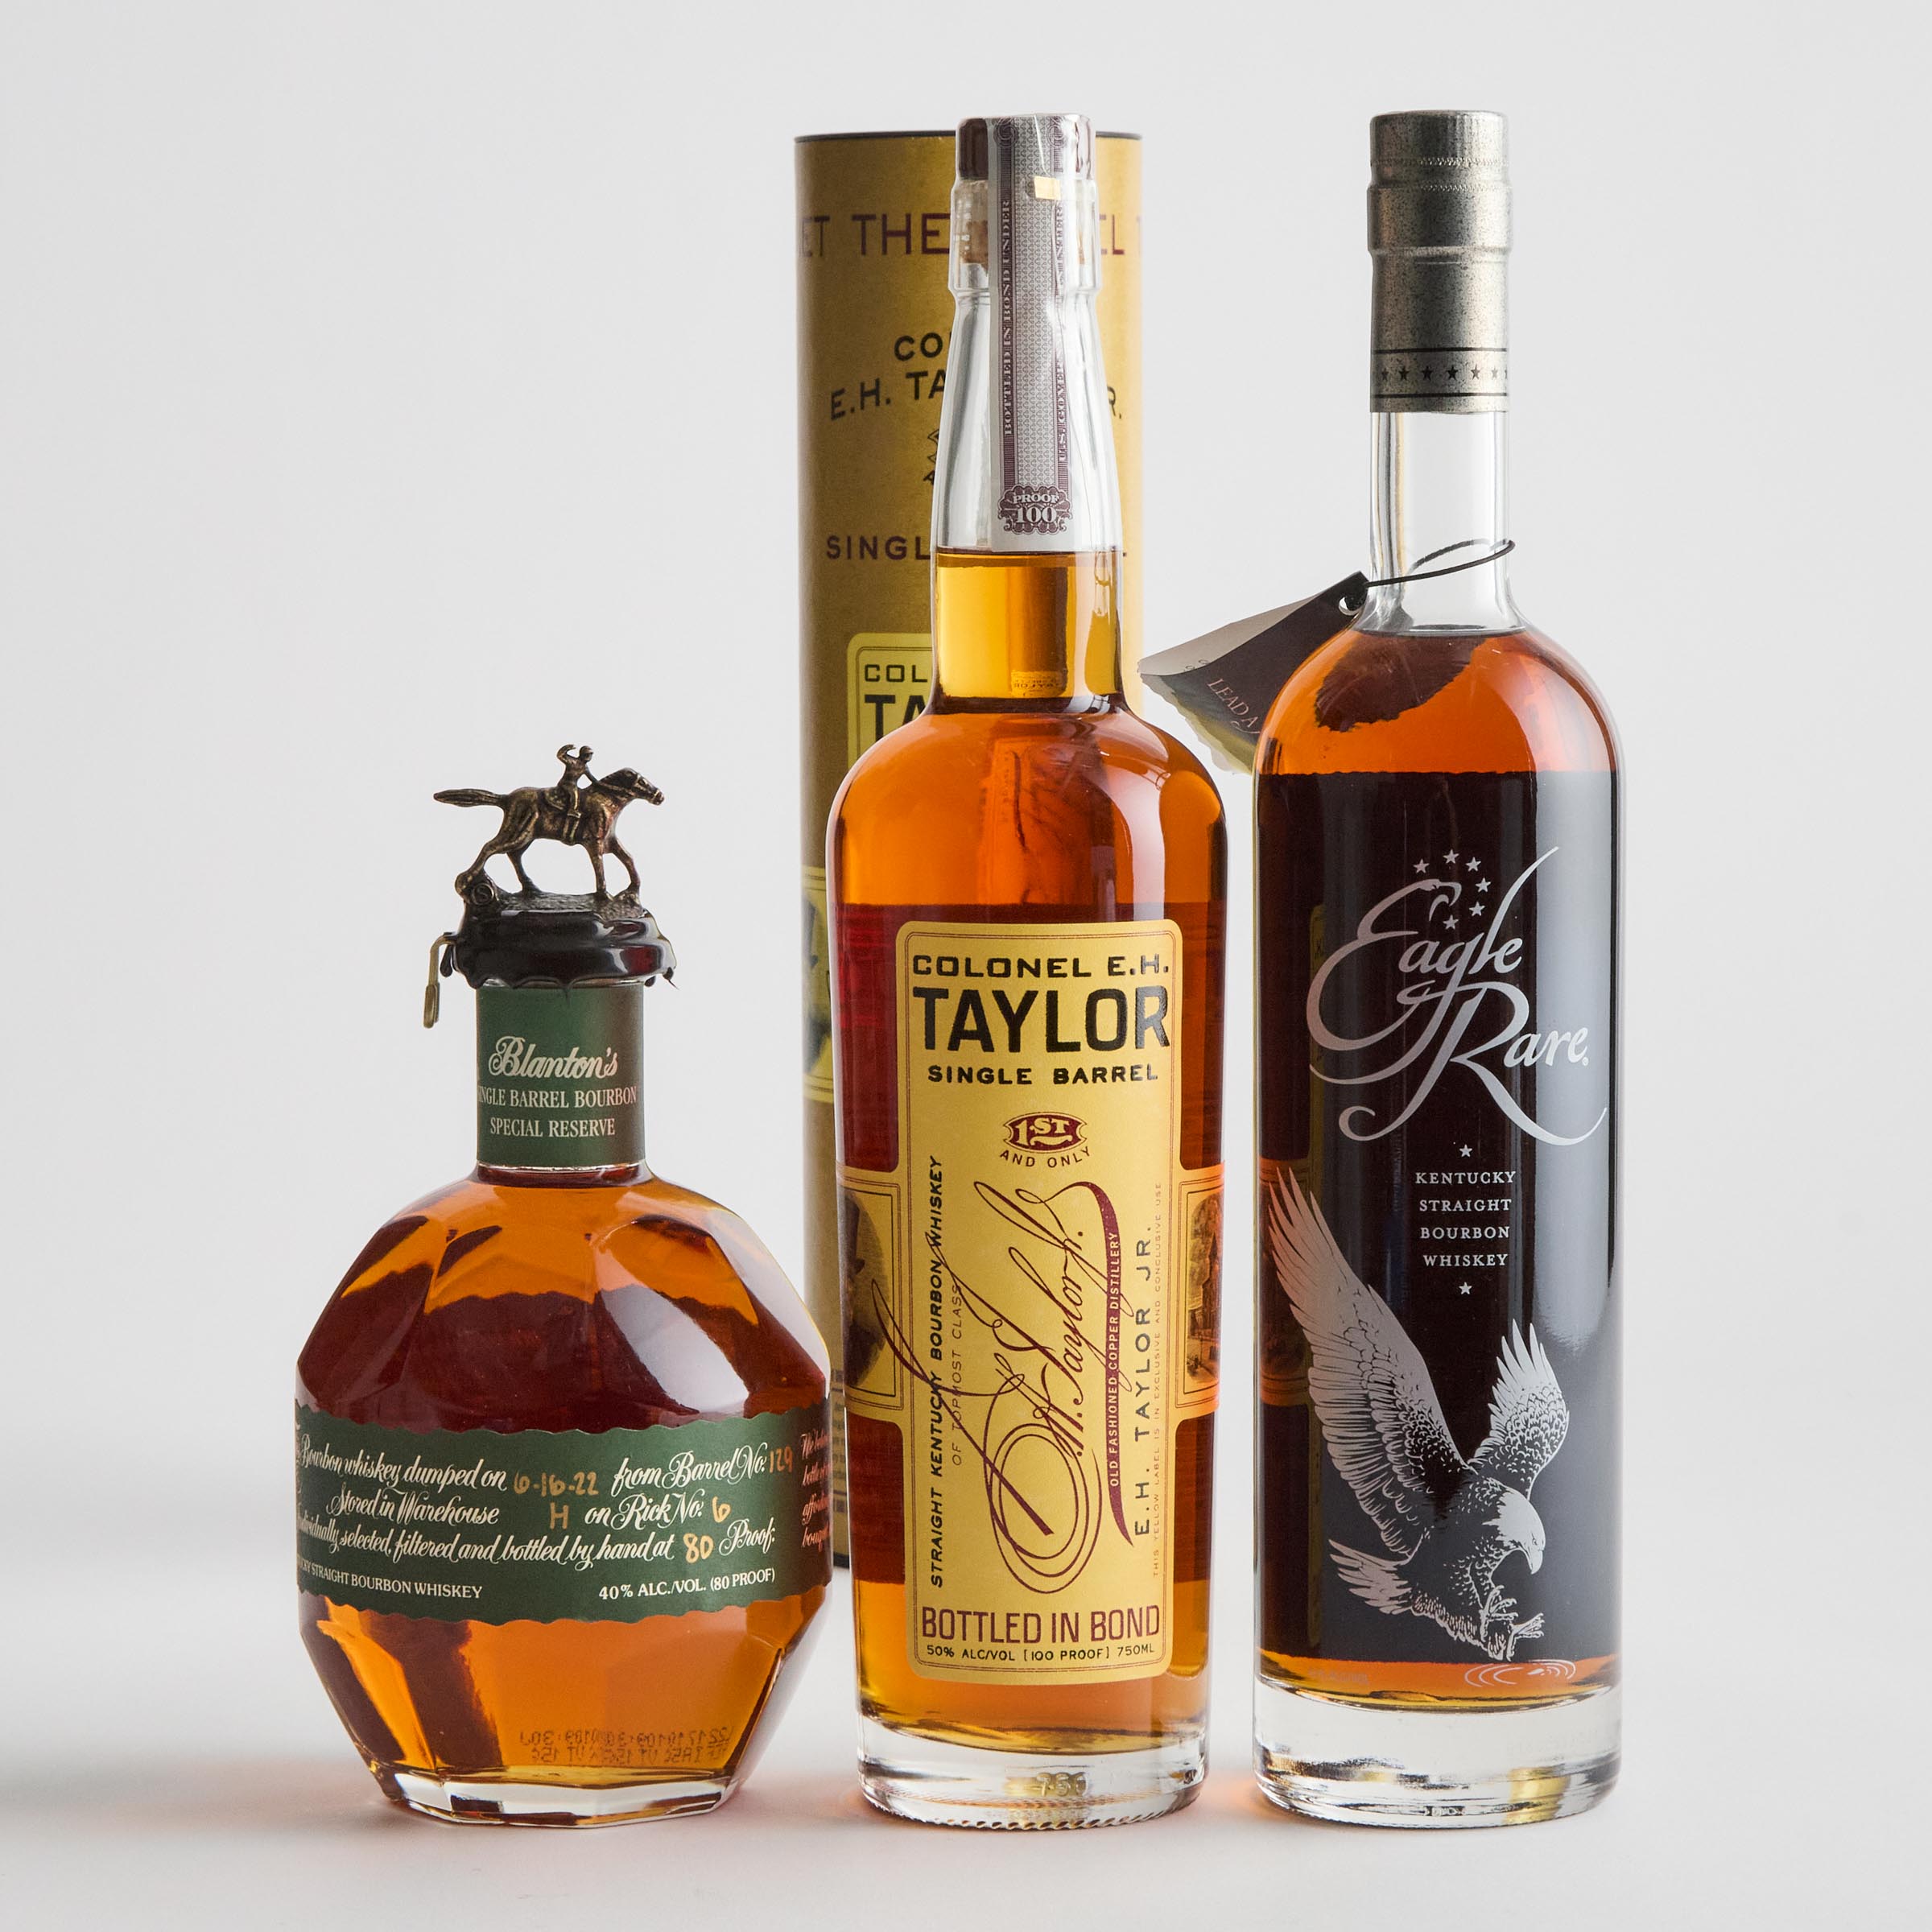 BLANTON’S SINGLE BARREL SPECIAL RESERVE KENTUCKY STRAIGHT BOURBON WHISKEY (ONE 750 ML)
COLONEL E.H.TAYLOR JR. SINGLE BARREL STRAIGHT KENTUCKY BOURBON WHISKEY (ONE 750 ML)
EAGLE RARE KENTUCKY STRAIGHT BOURBON WHISKEY 10 YEARS (ONE 750 ML)